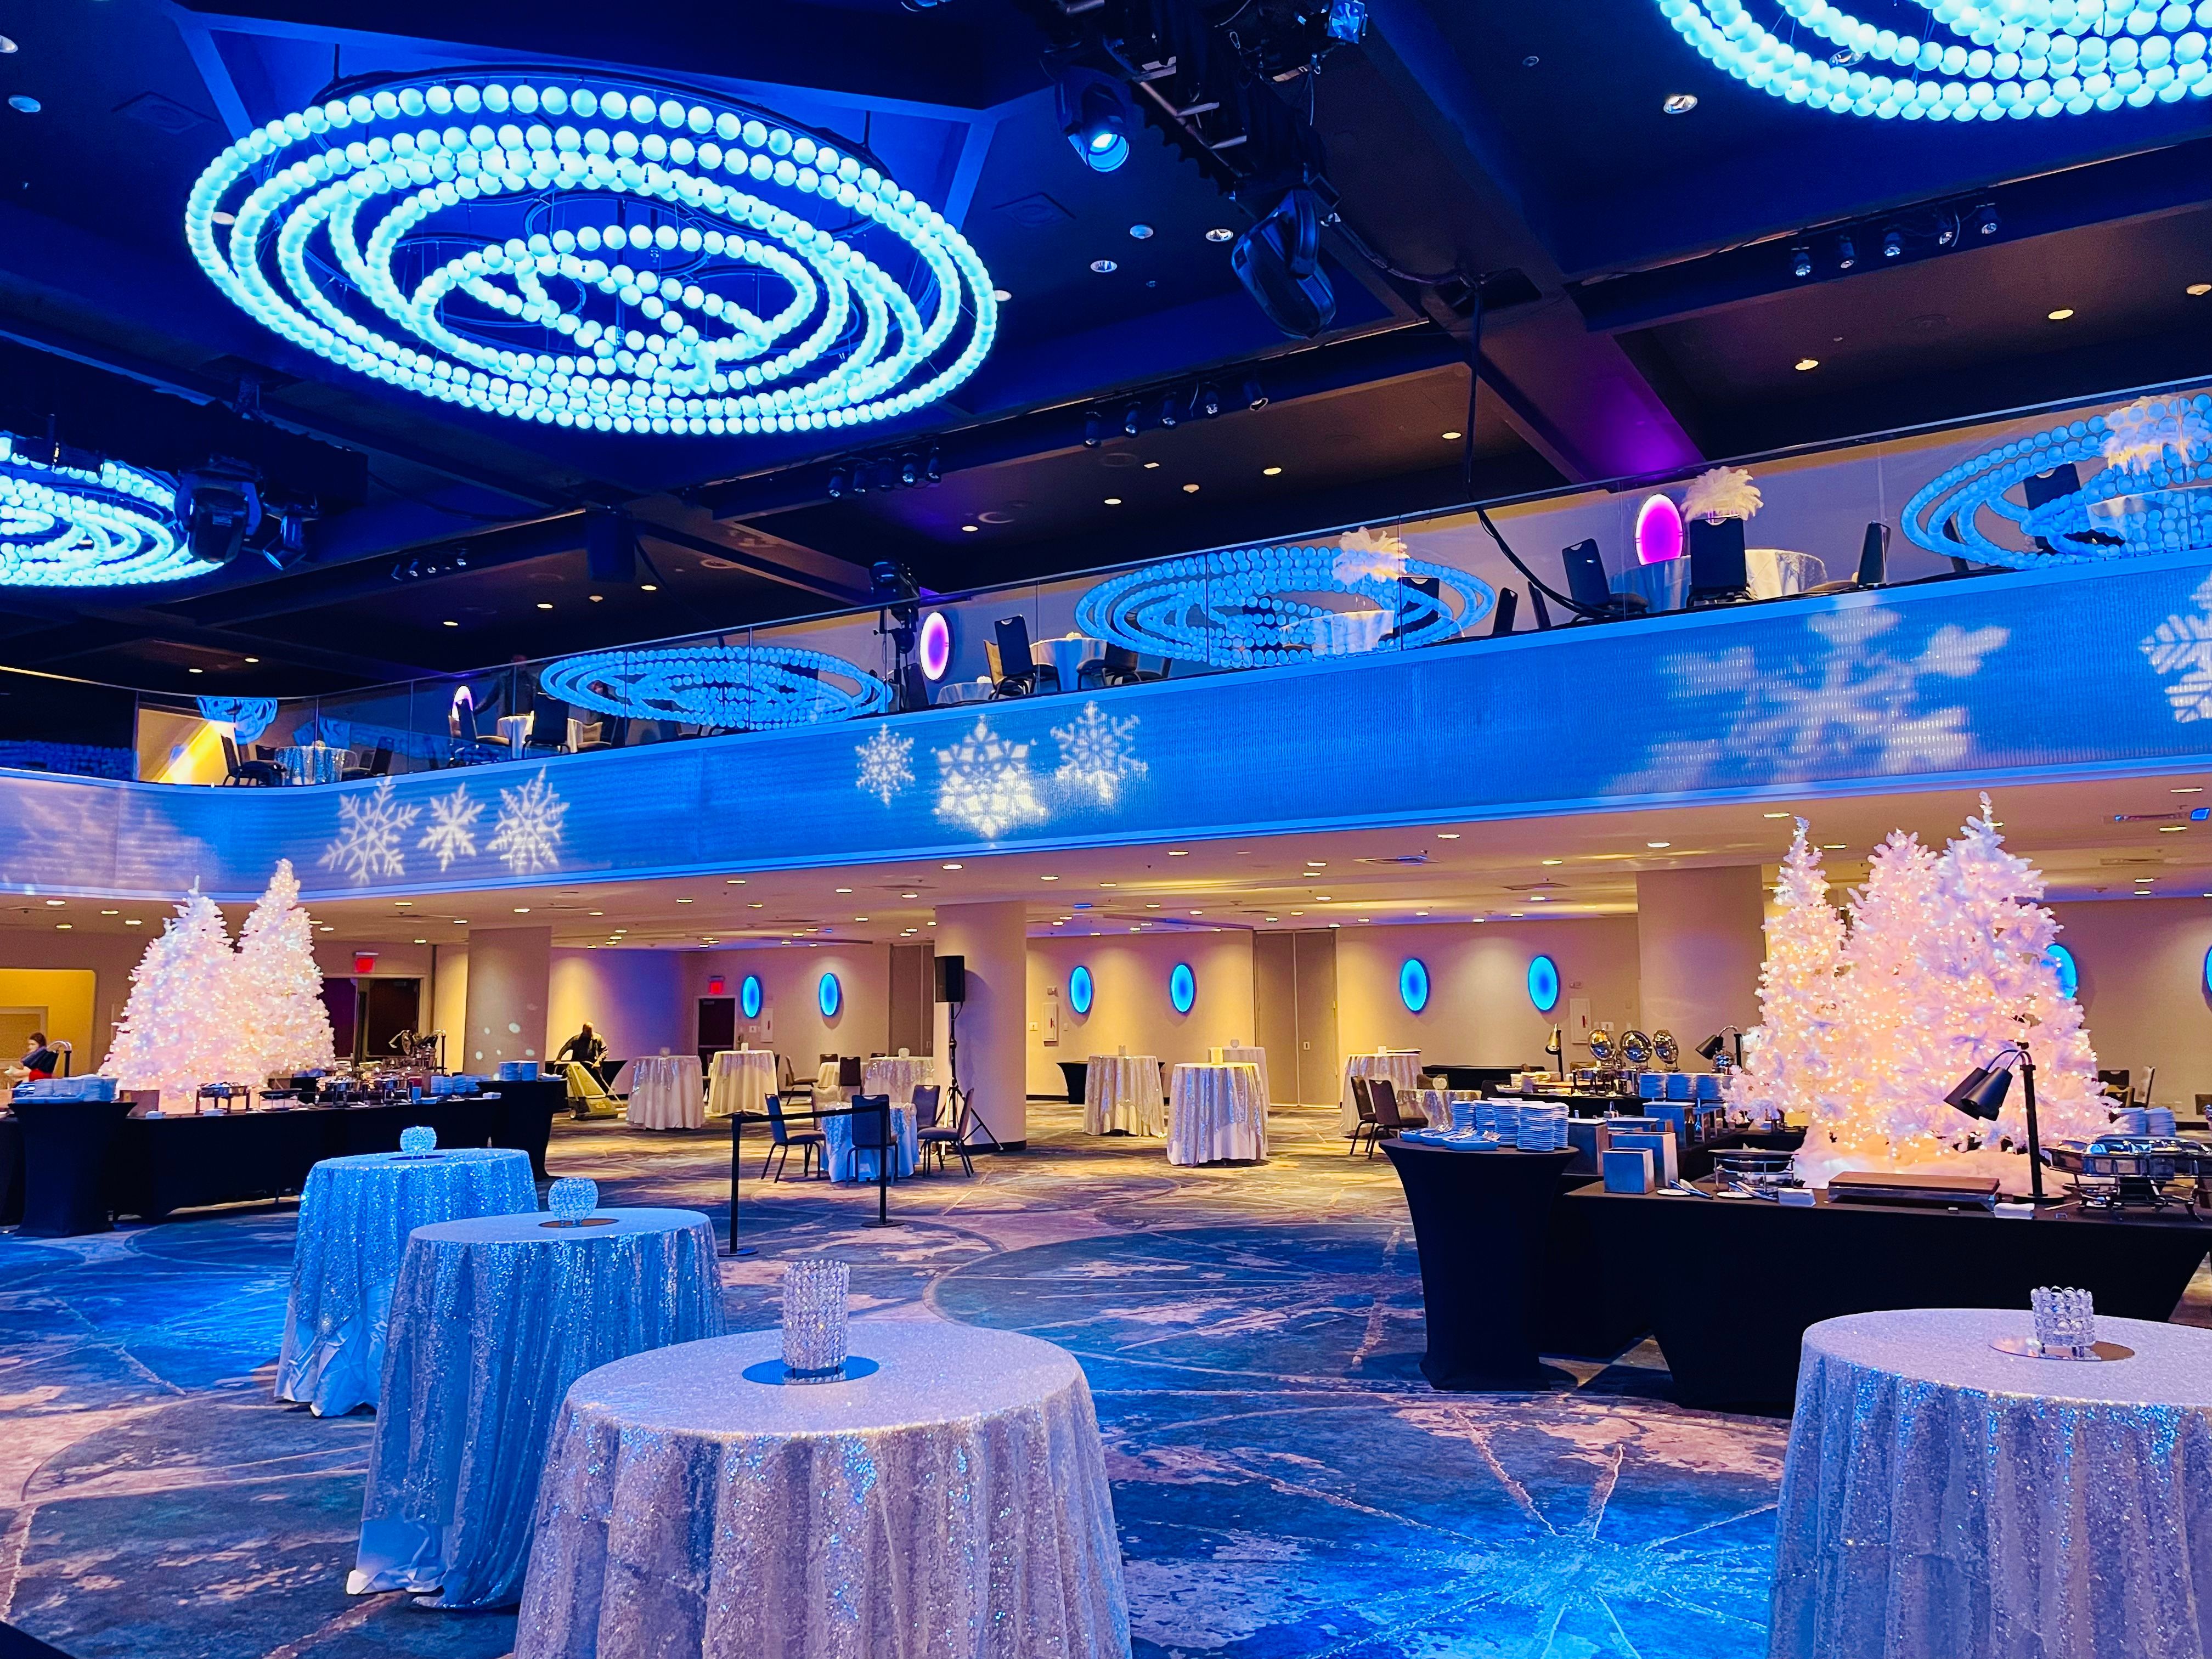 Corporate Christmas party in hotel ballroom